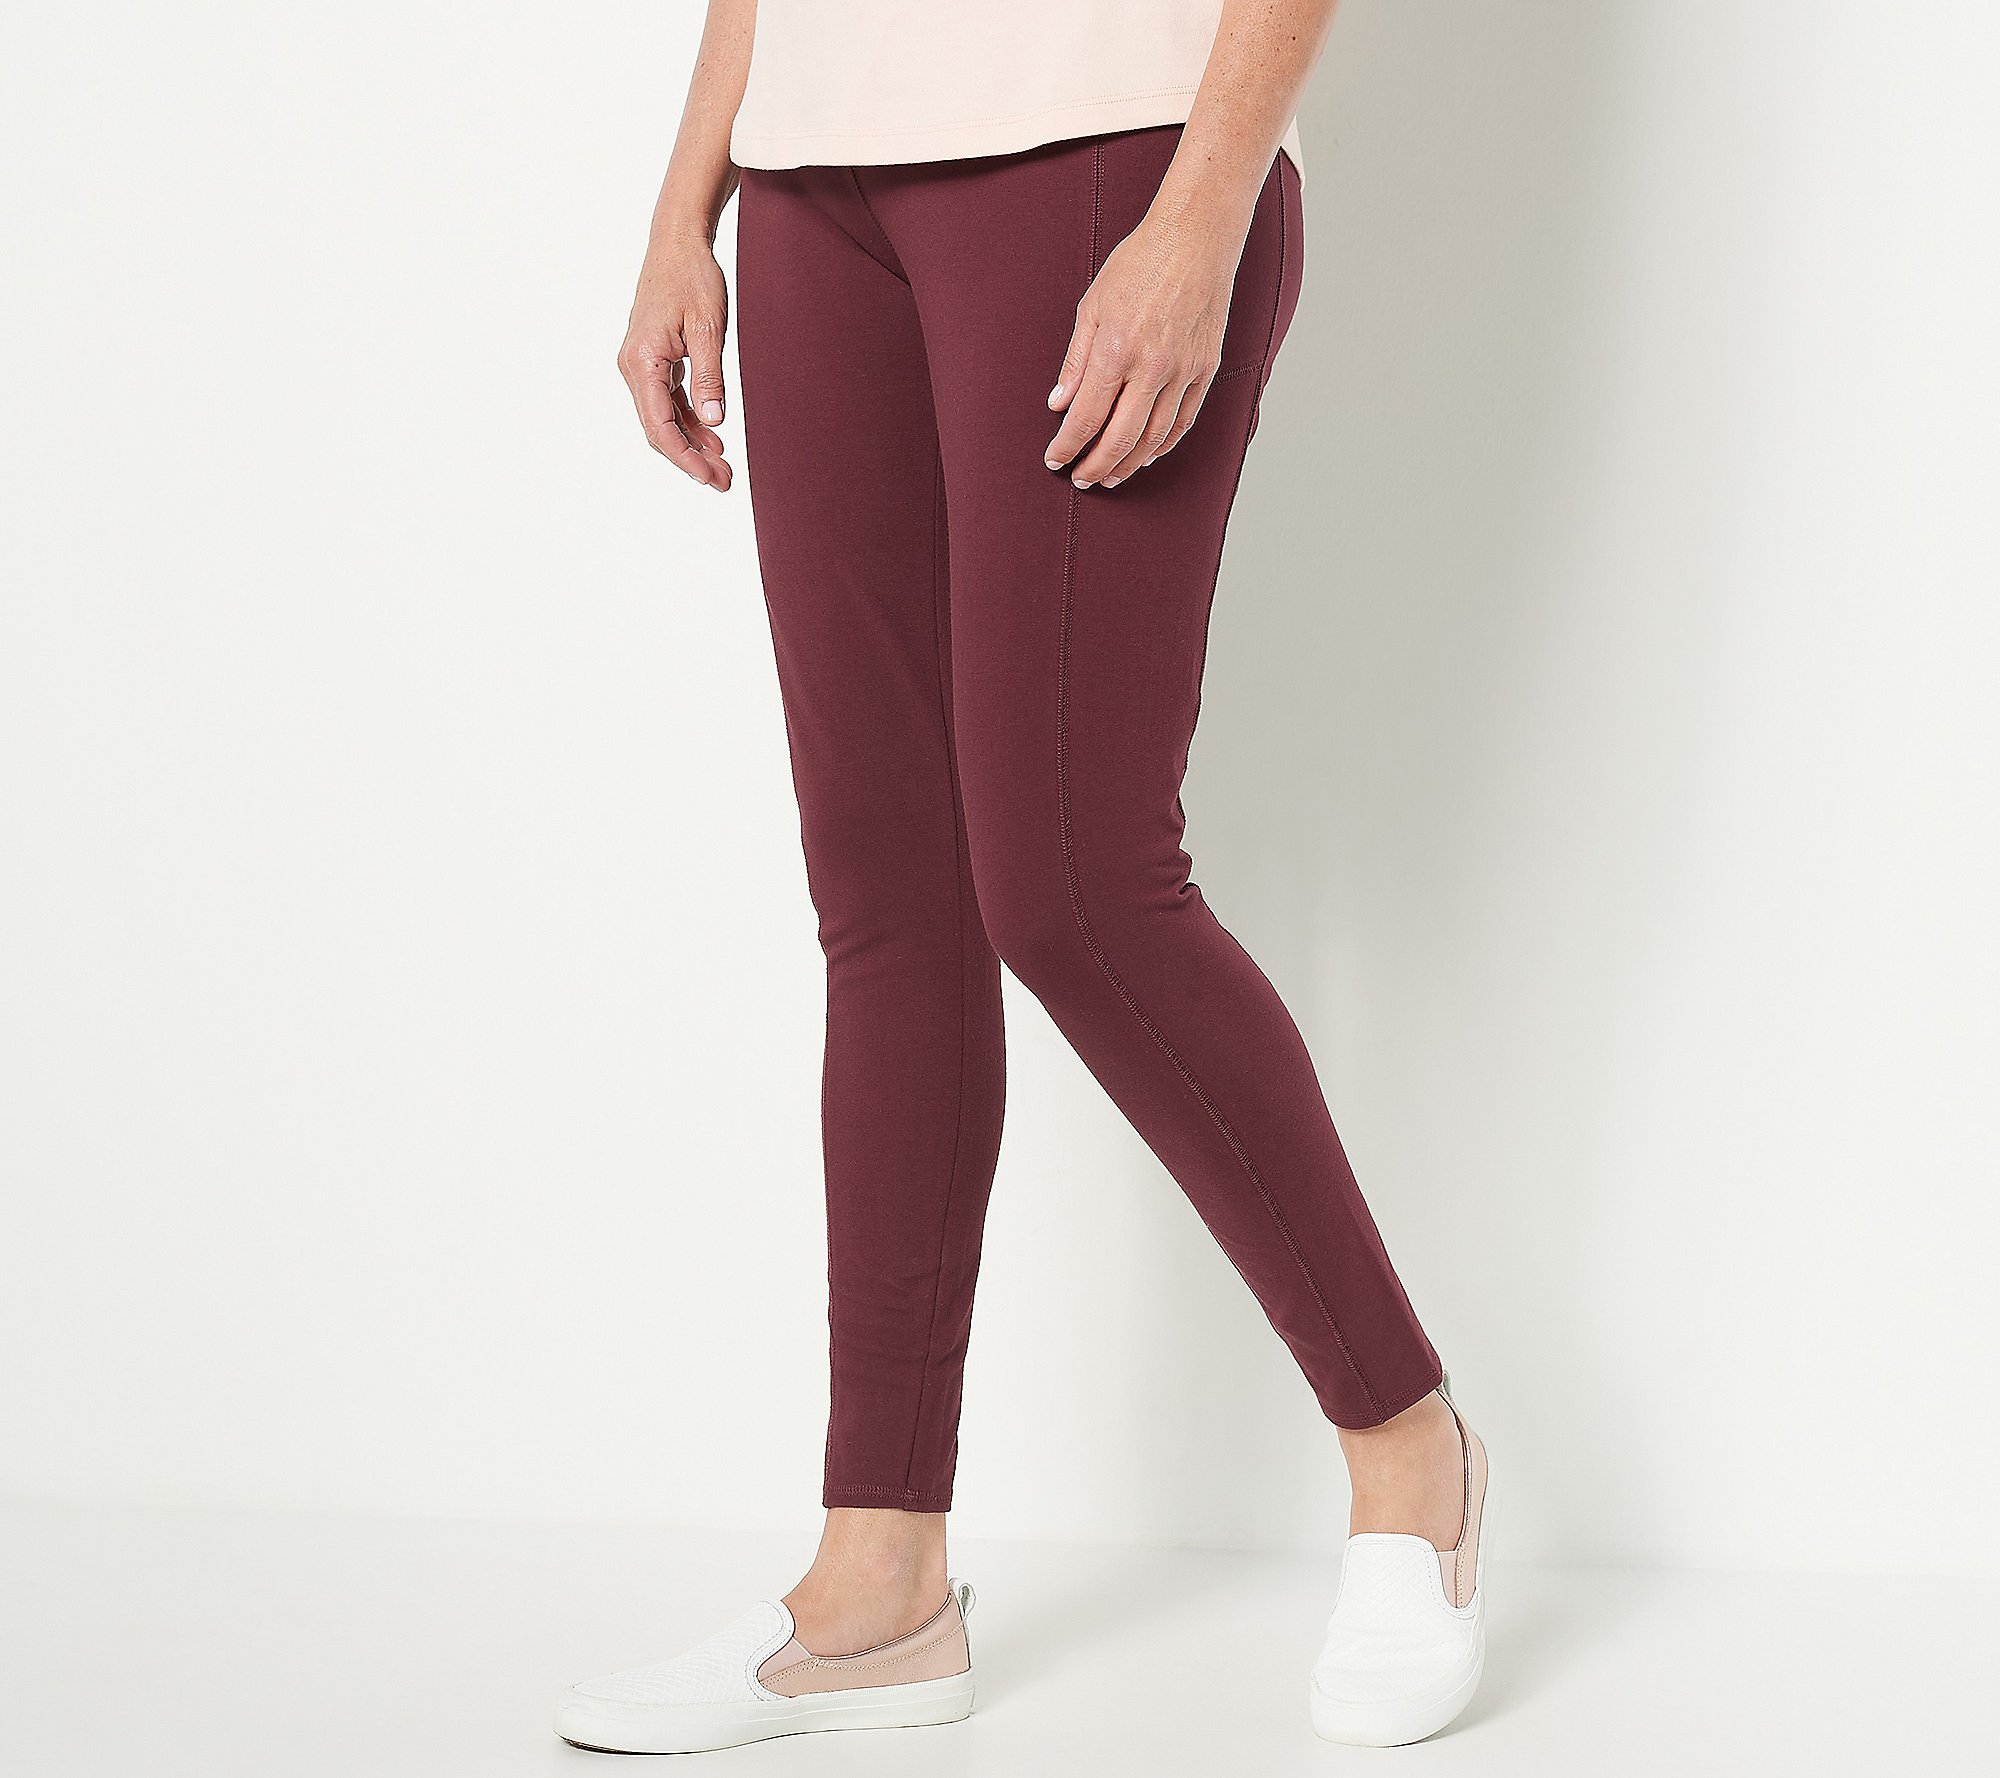 Denim & Co. Active Petite Duo Stretch Pant with Side Pocket